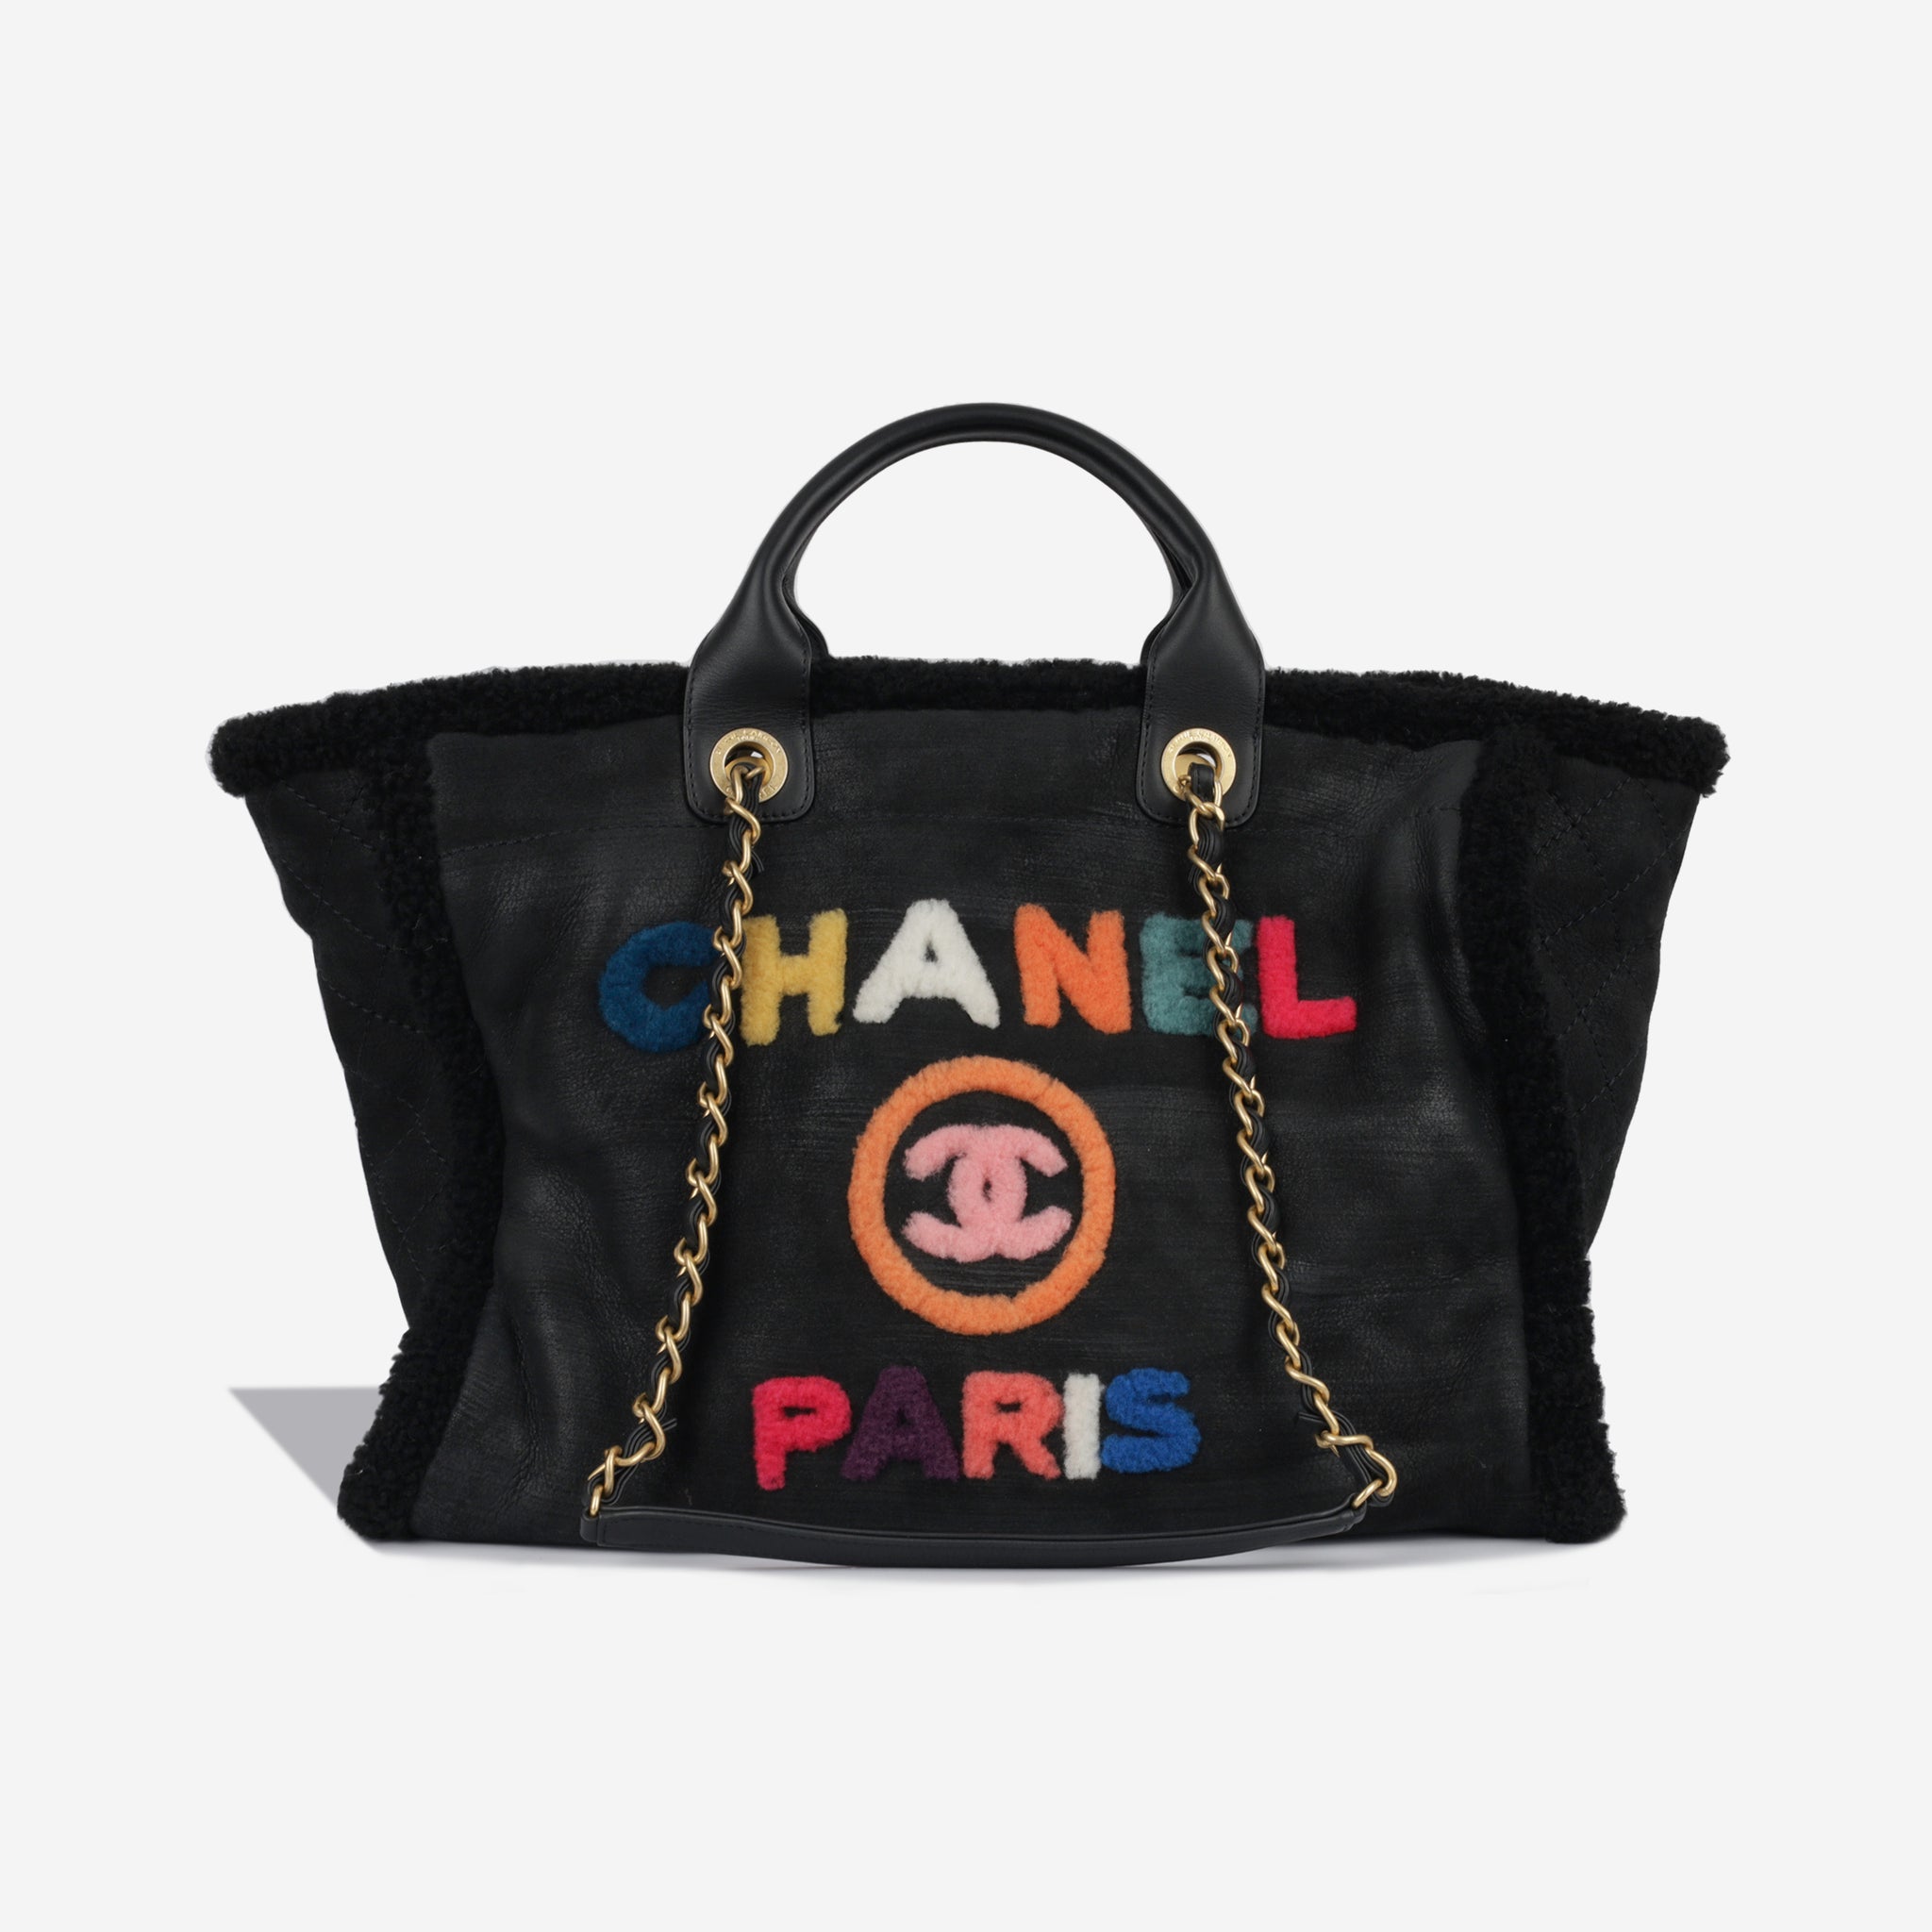 Chanel - Deauville - Large Tote - Black Shearling - Multi - GHW - 2021